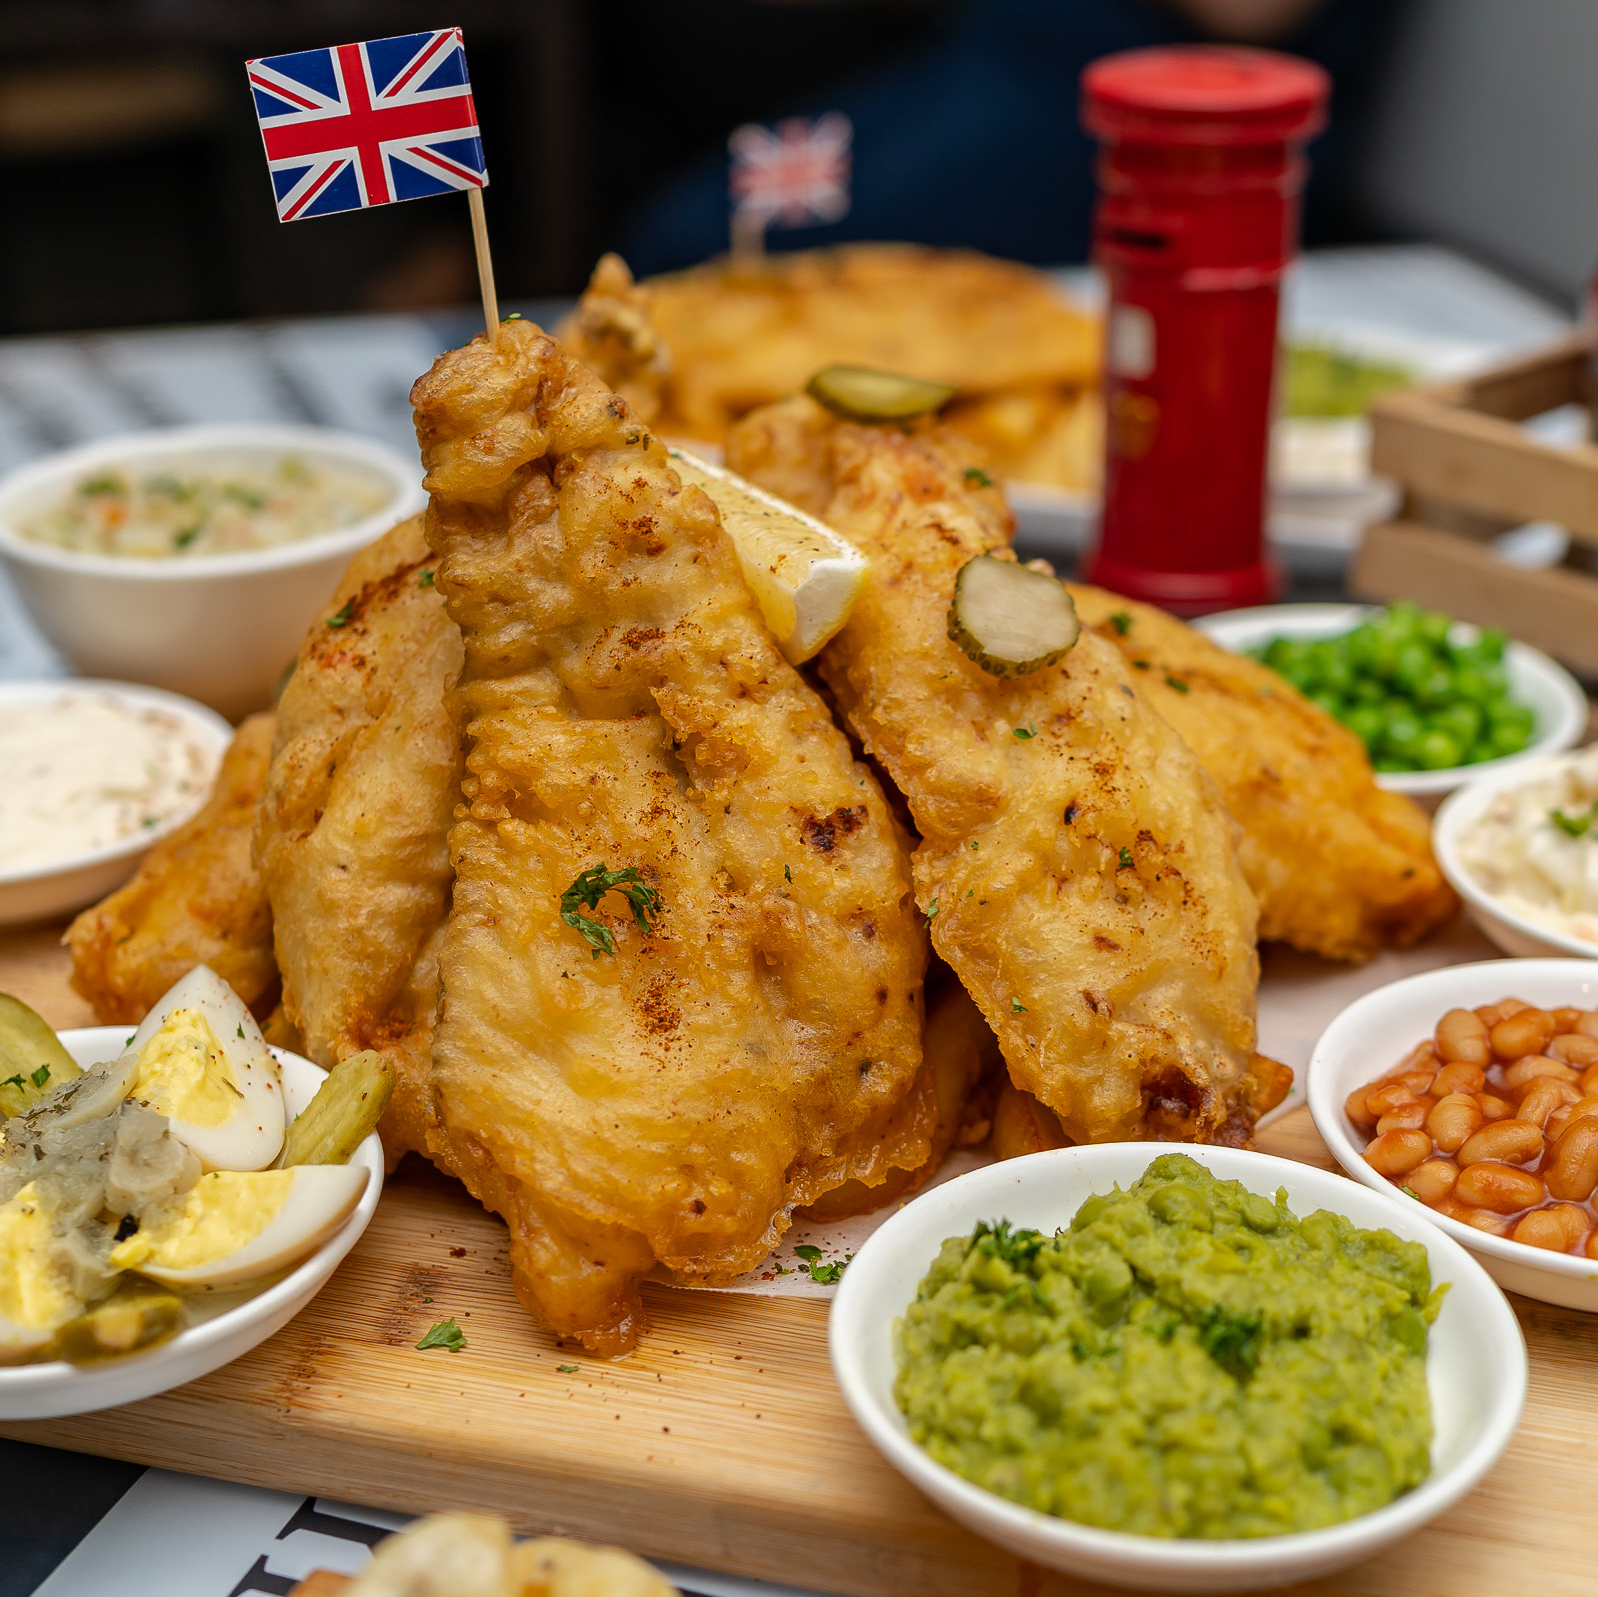 ss15 restaurants - fish and chips